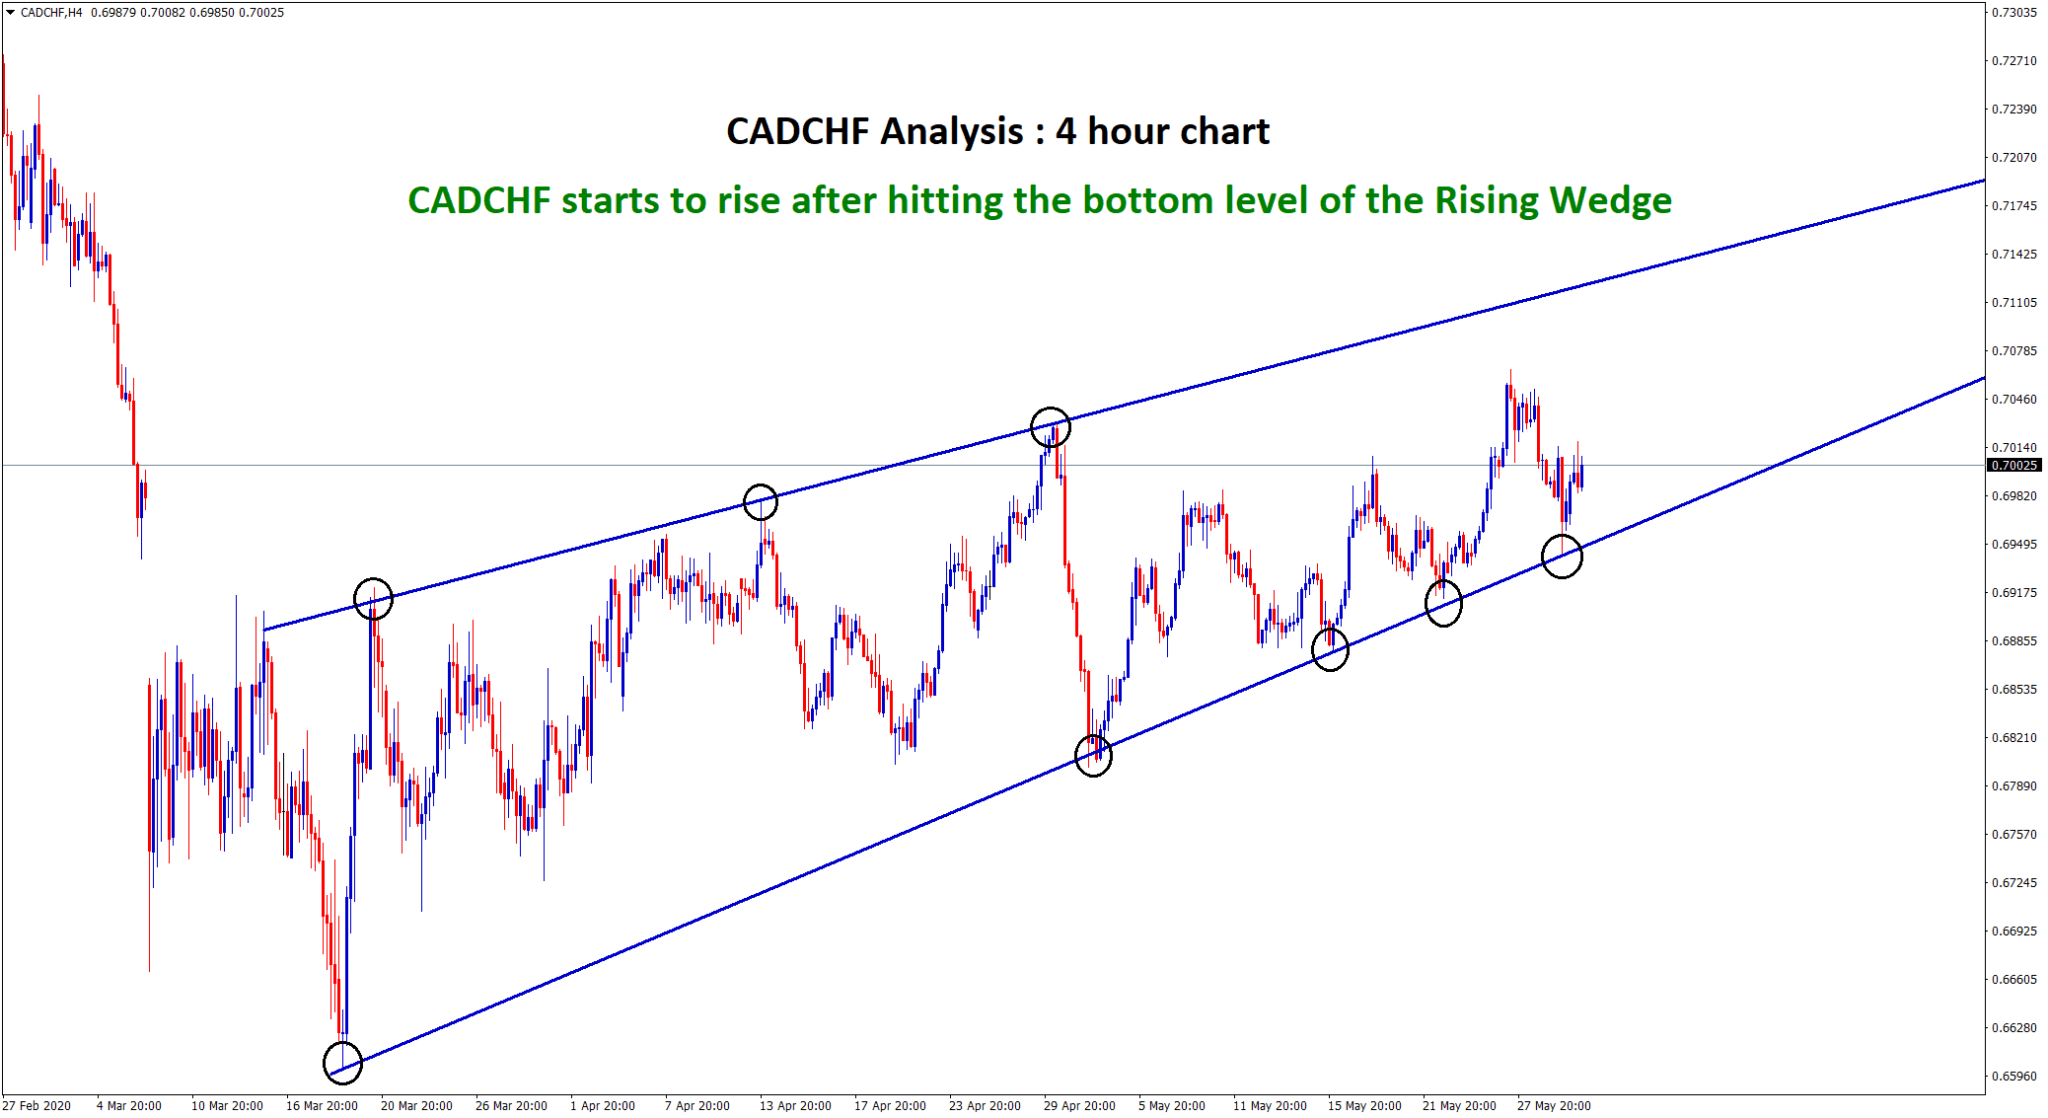 CADCHF rising from the bottom in rising wedge